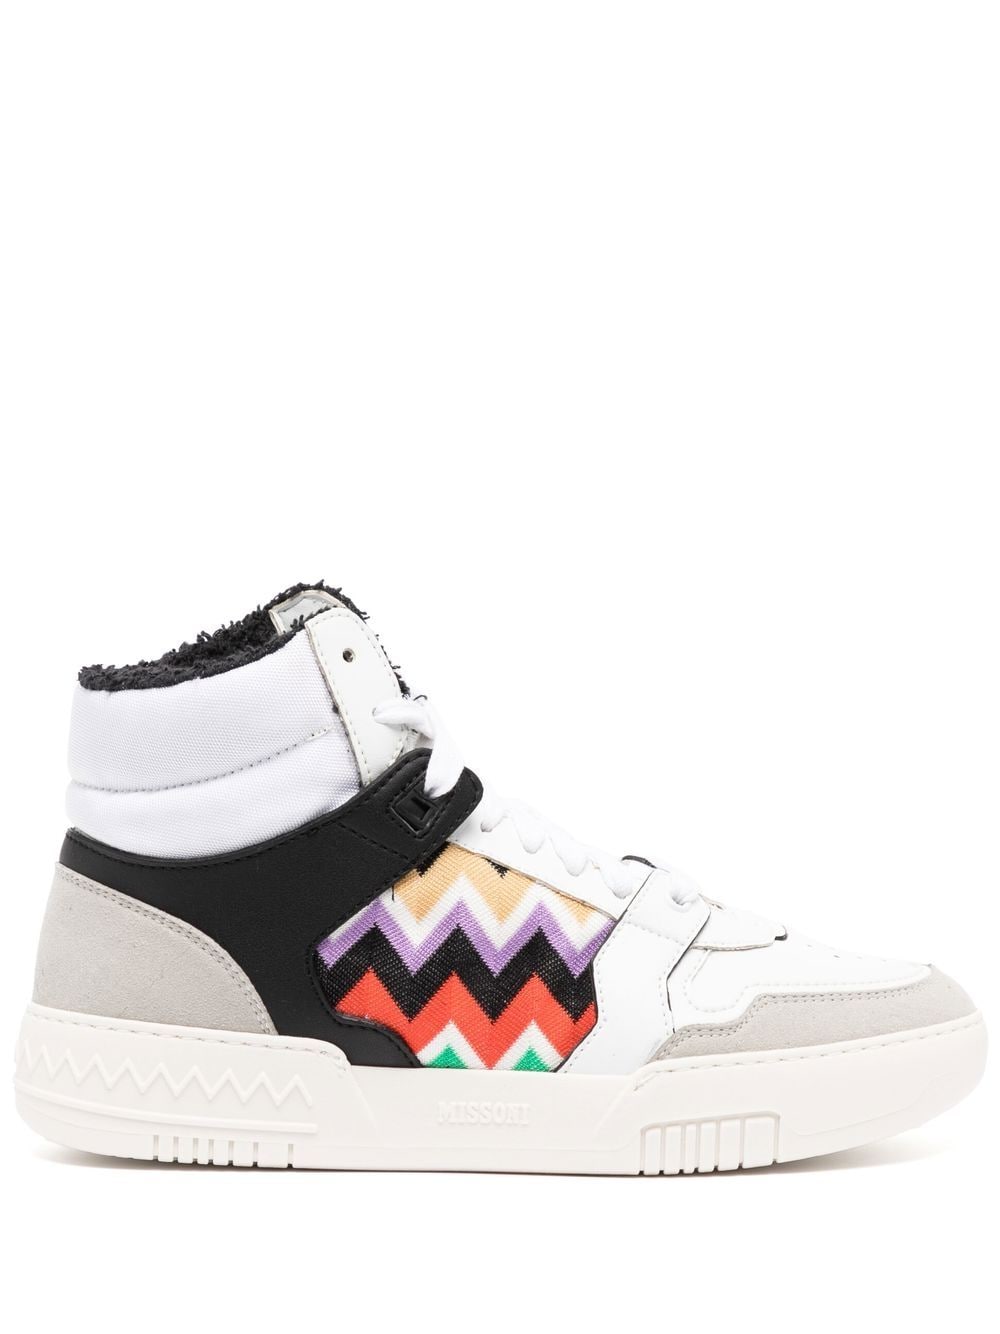 Missoni Zigzag Panelled High-top Sneakers In White